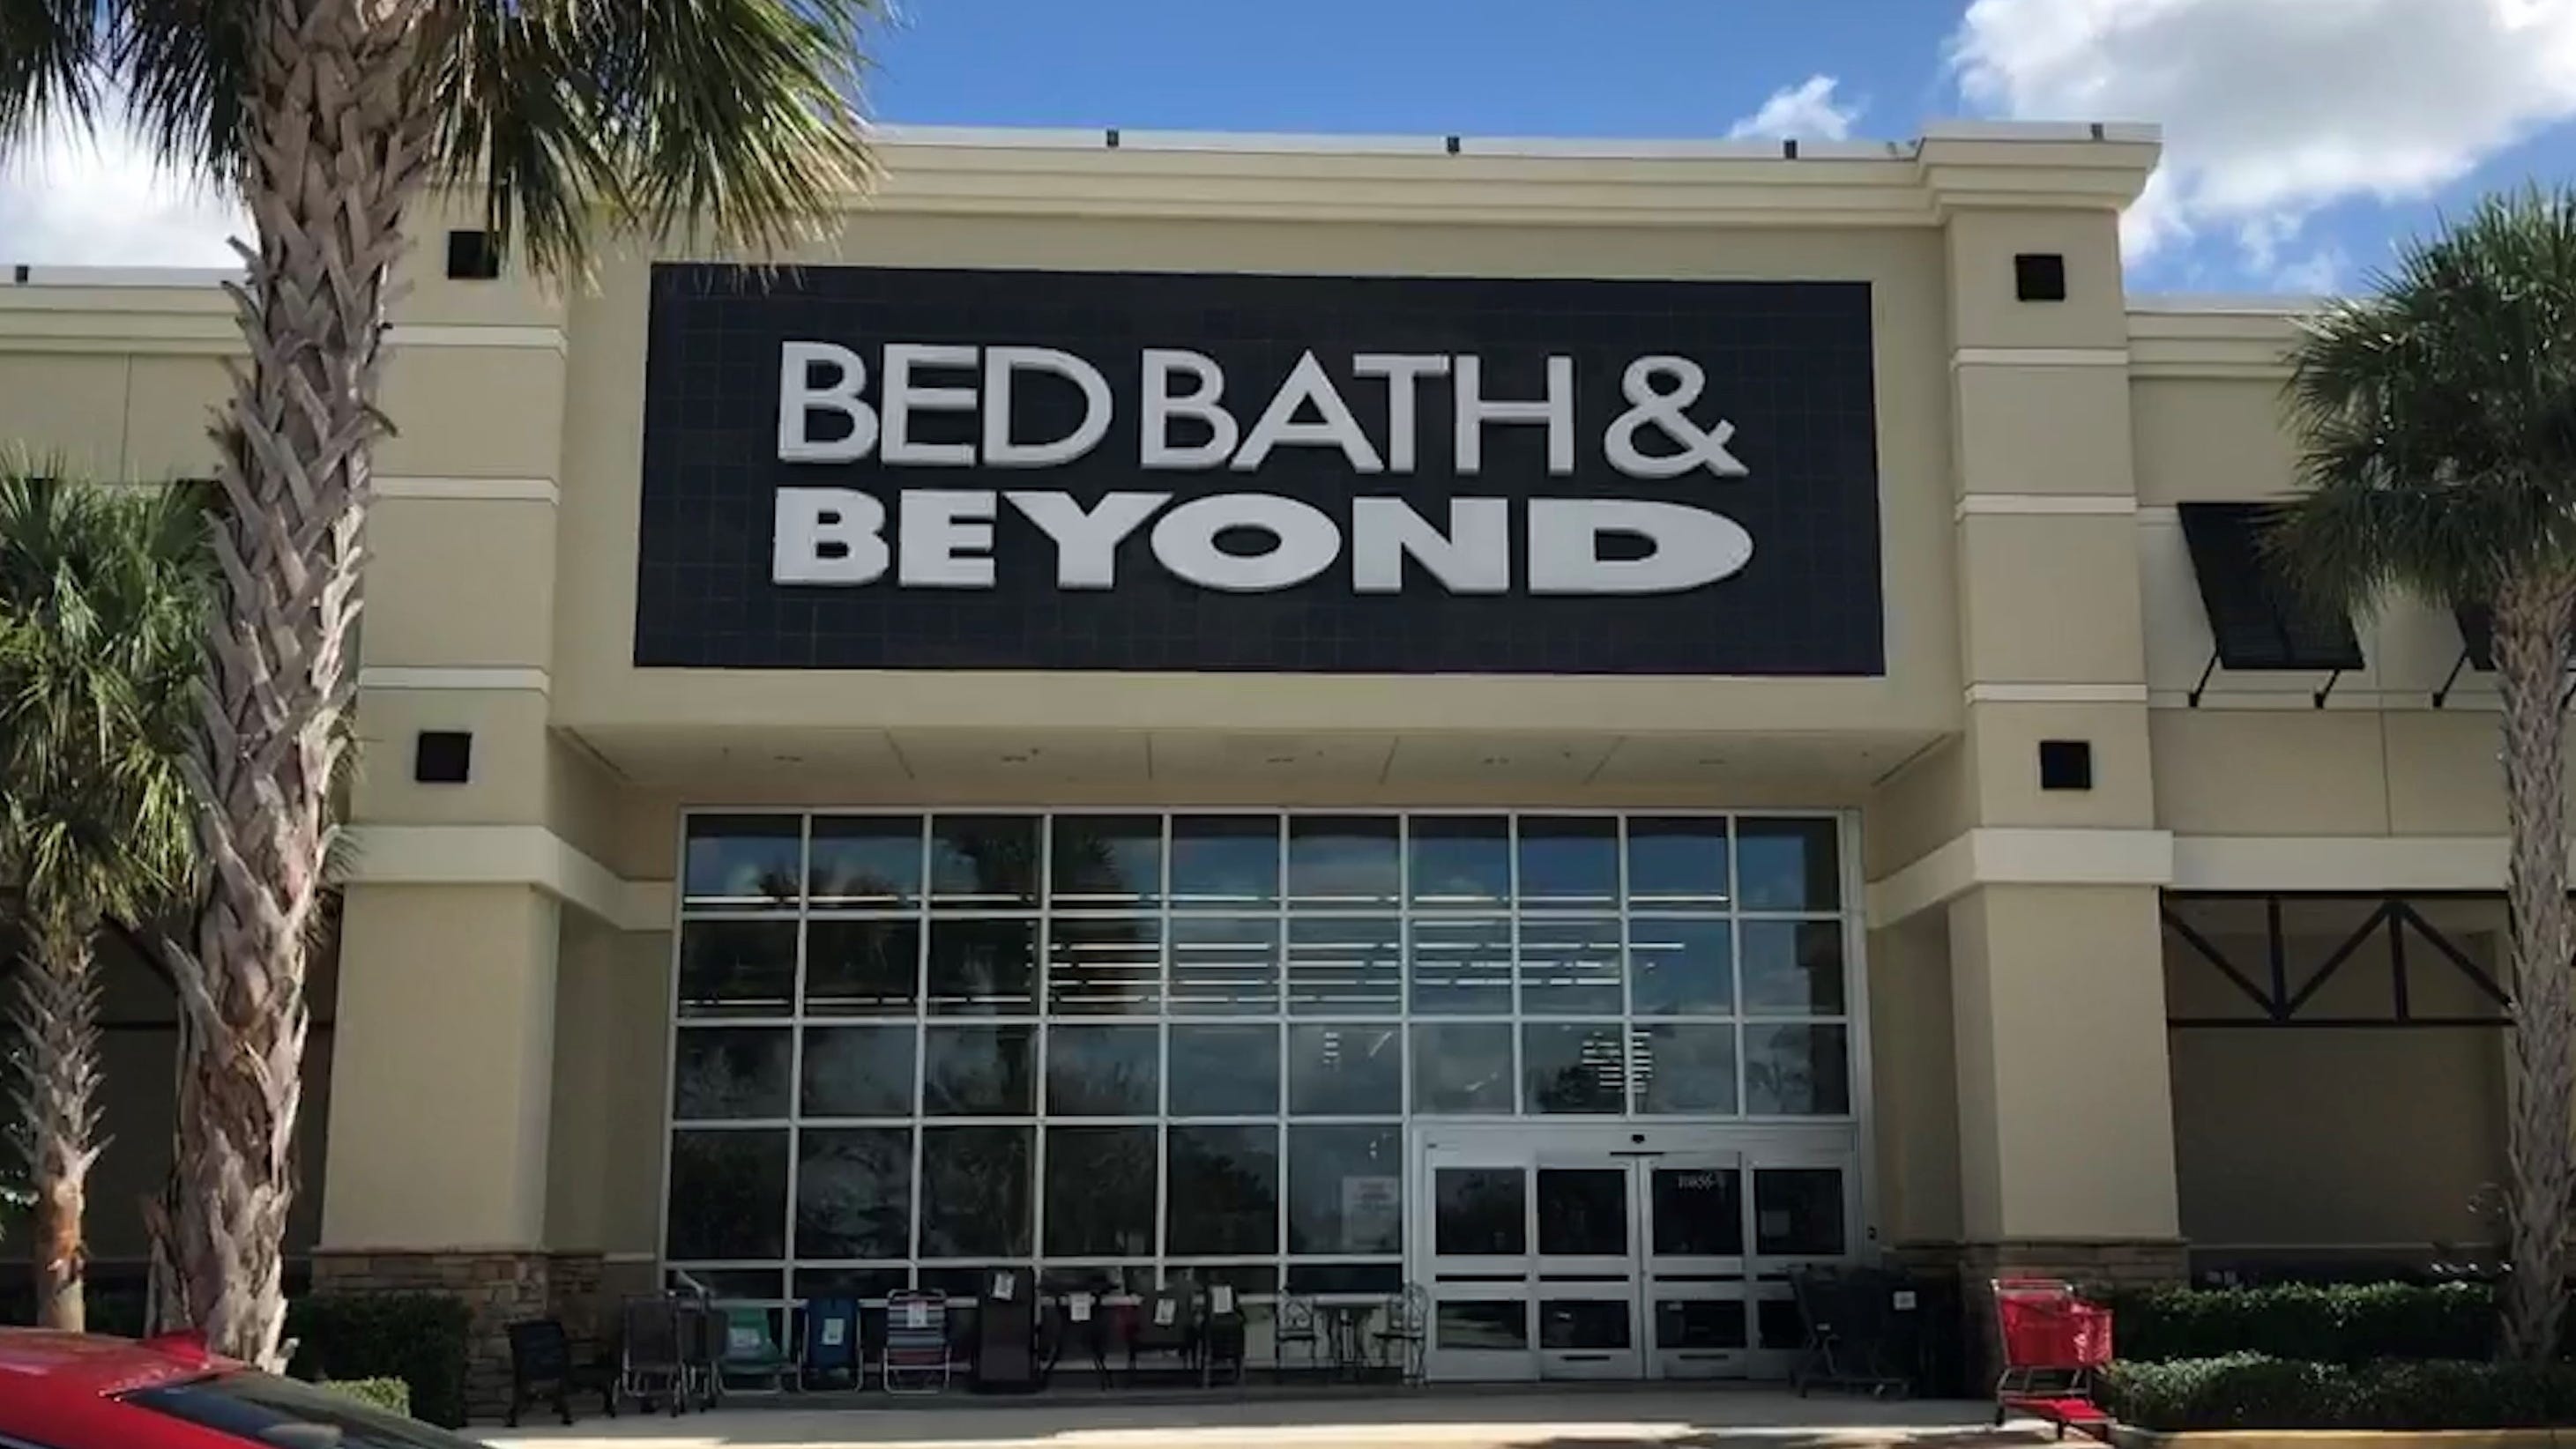 bed bath and beyond carry mattresses in store